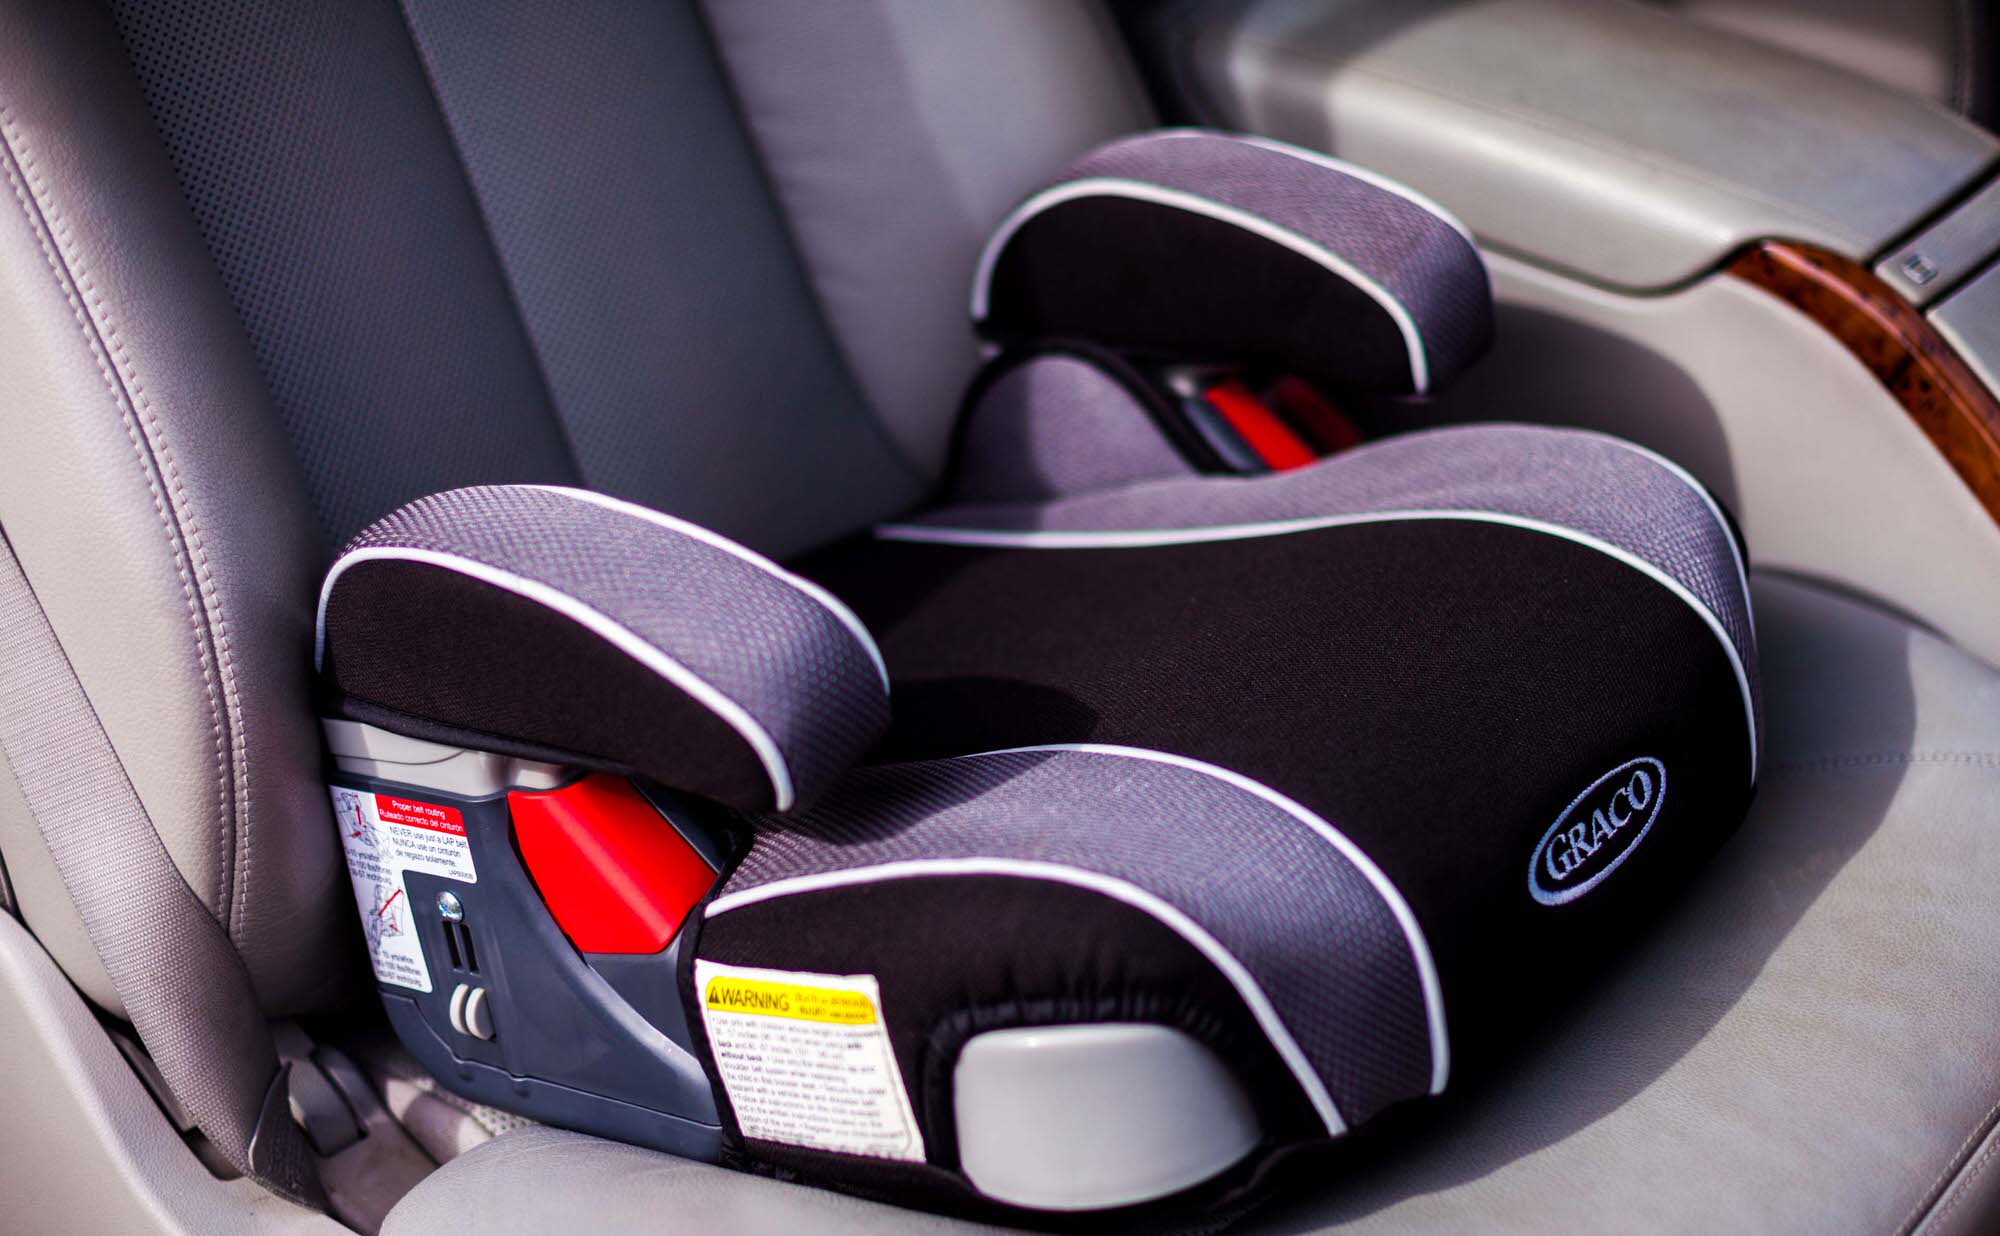  How Long Are Graco Booster Seats Good For